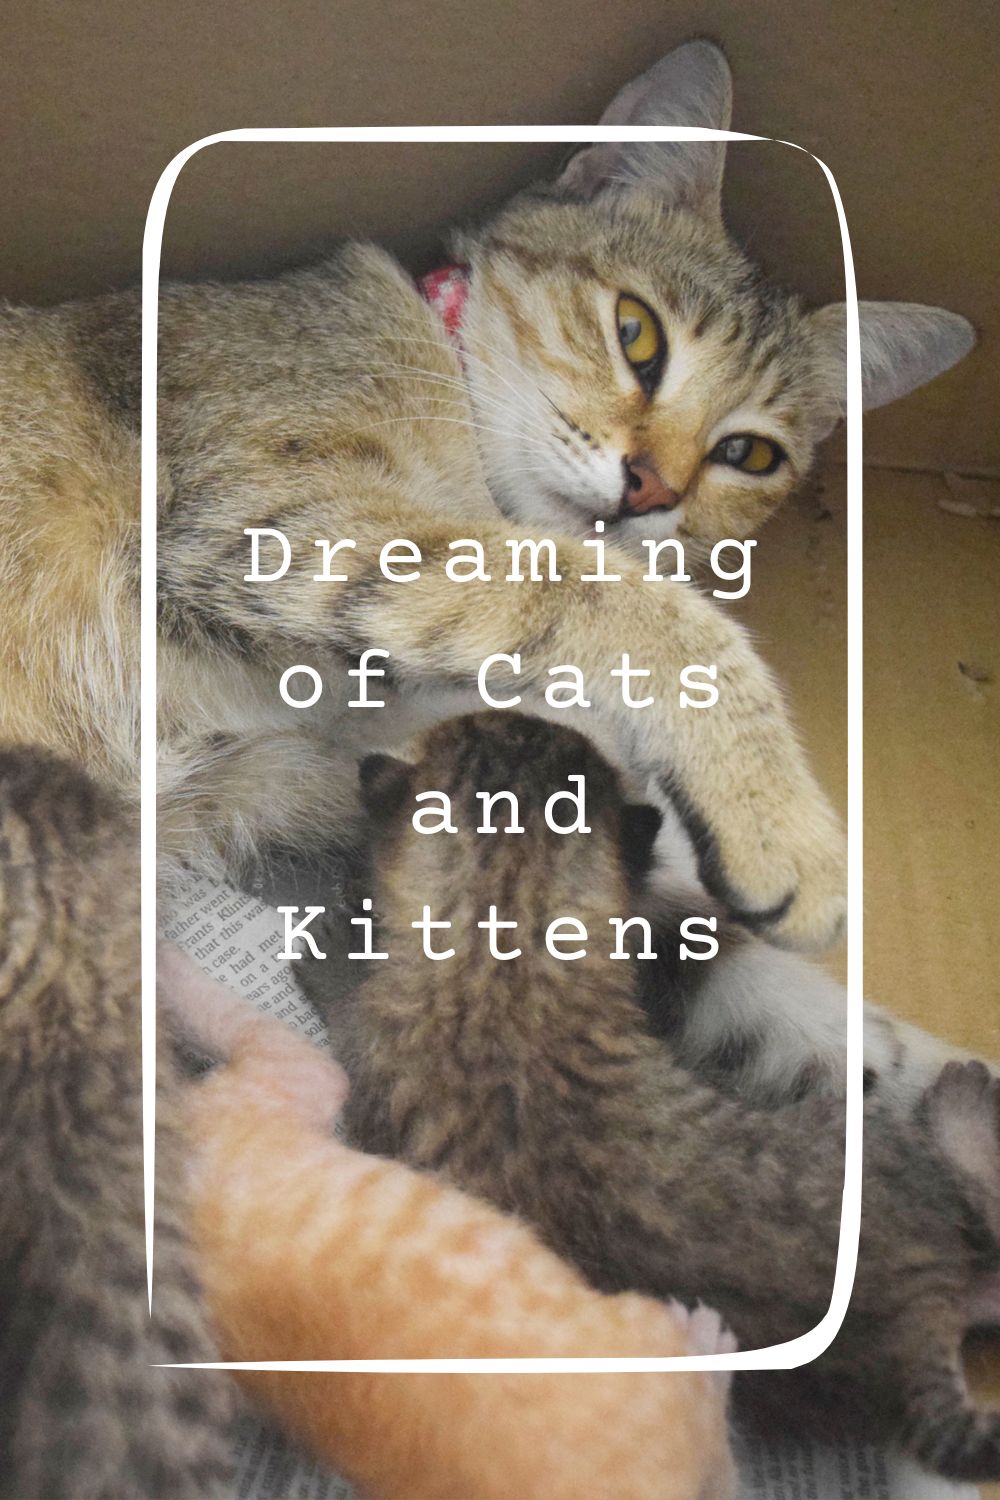 Dreaming of Cats and Kittens4